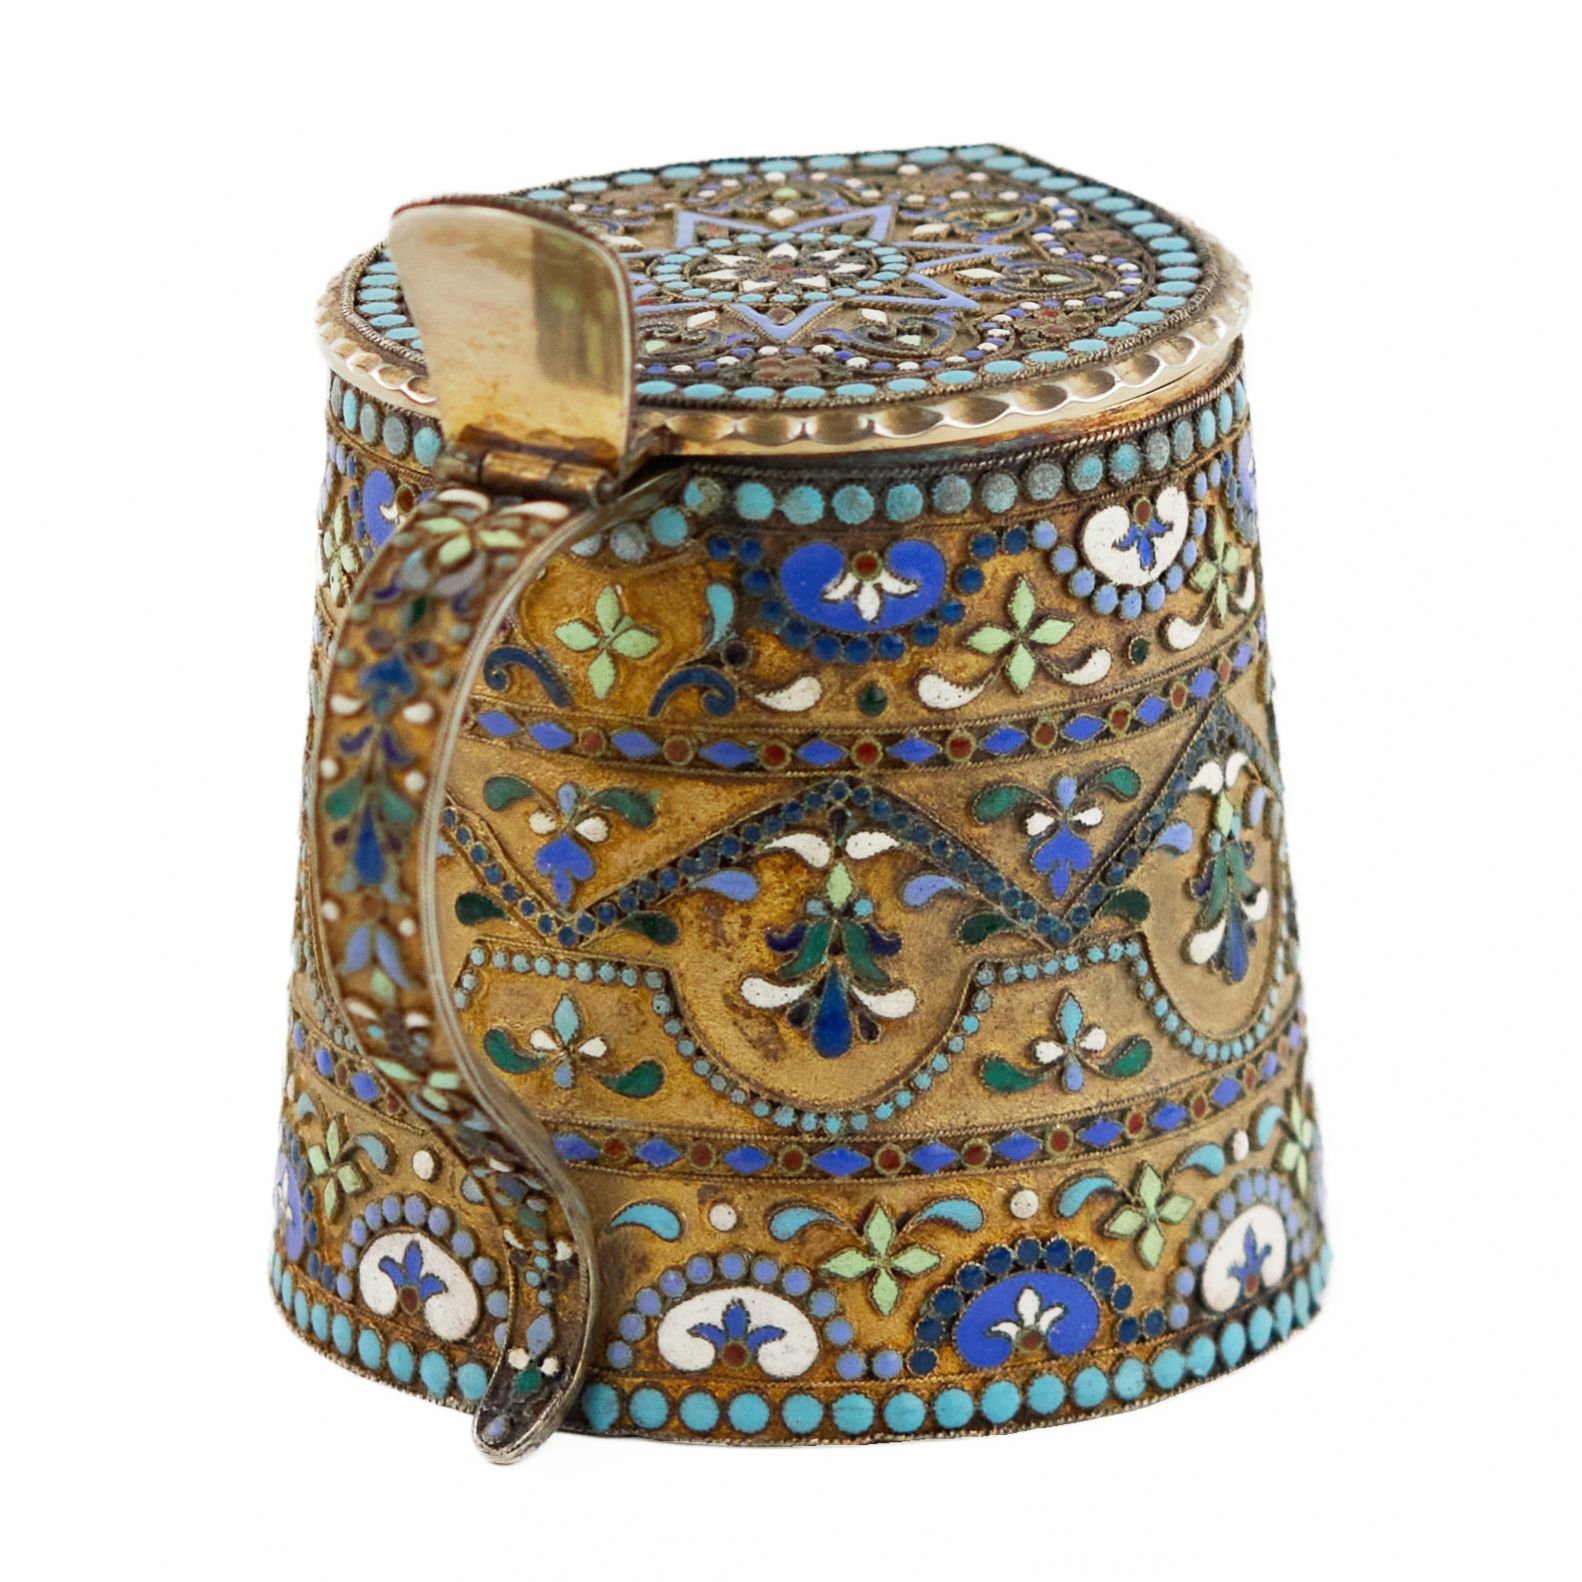 Russian, silver cloisonne enamel mug in neo-Russian style. 20th century. - Image 3 of 8